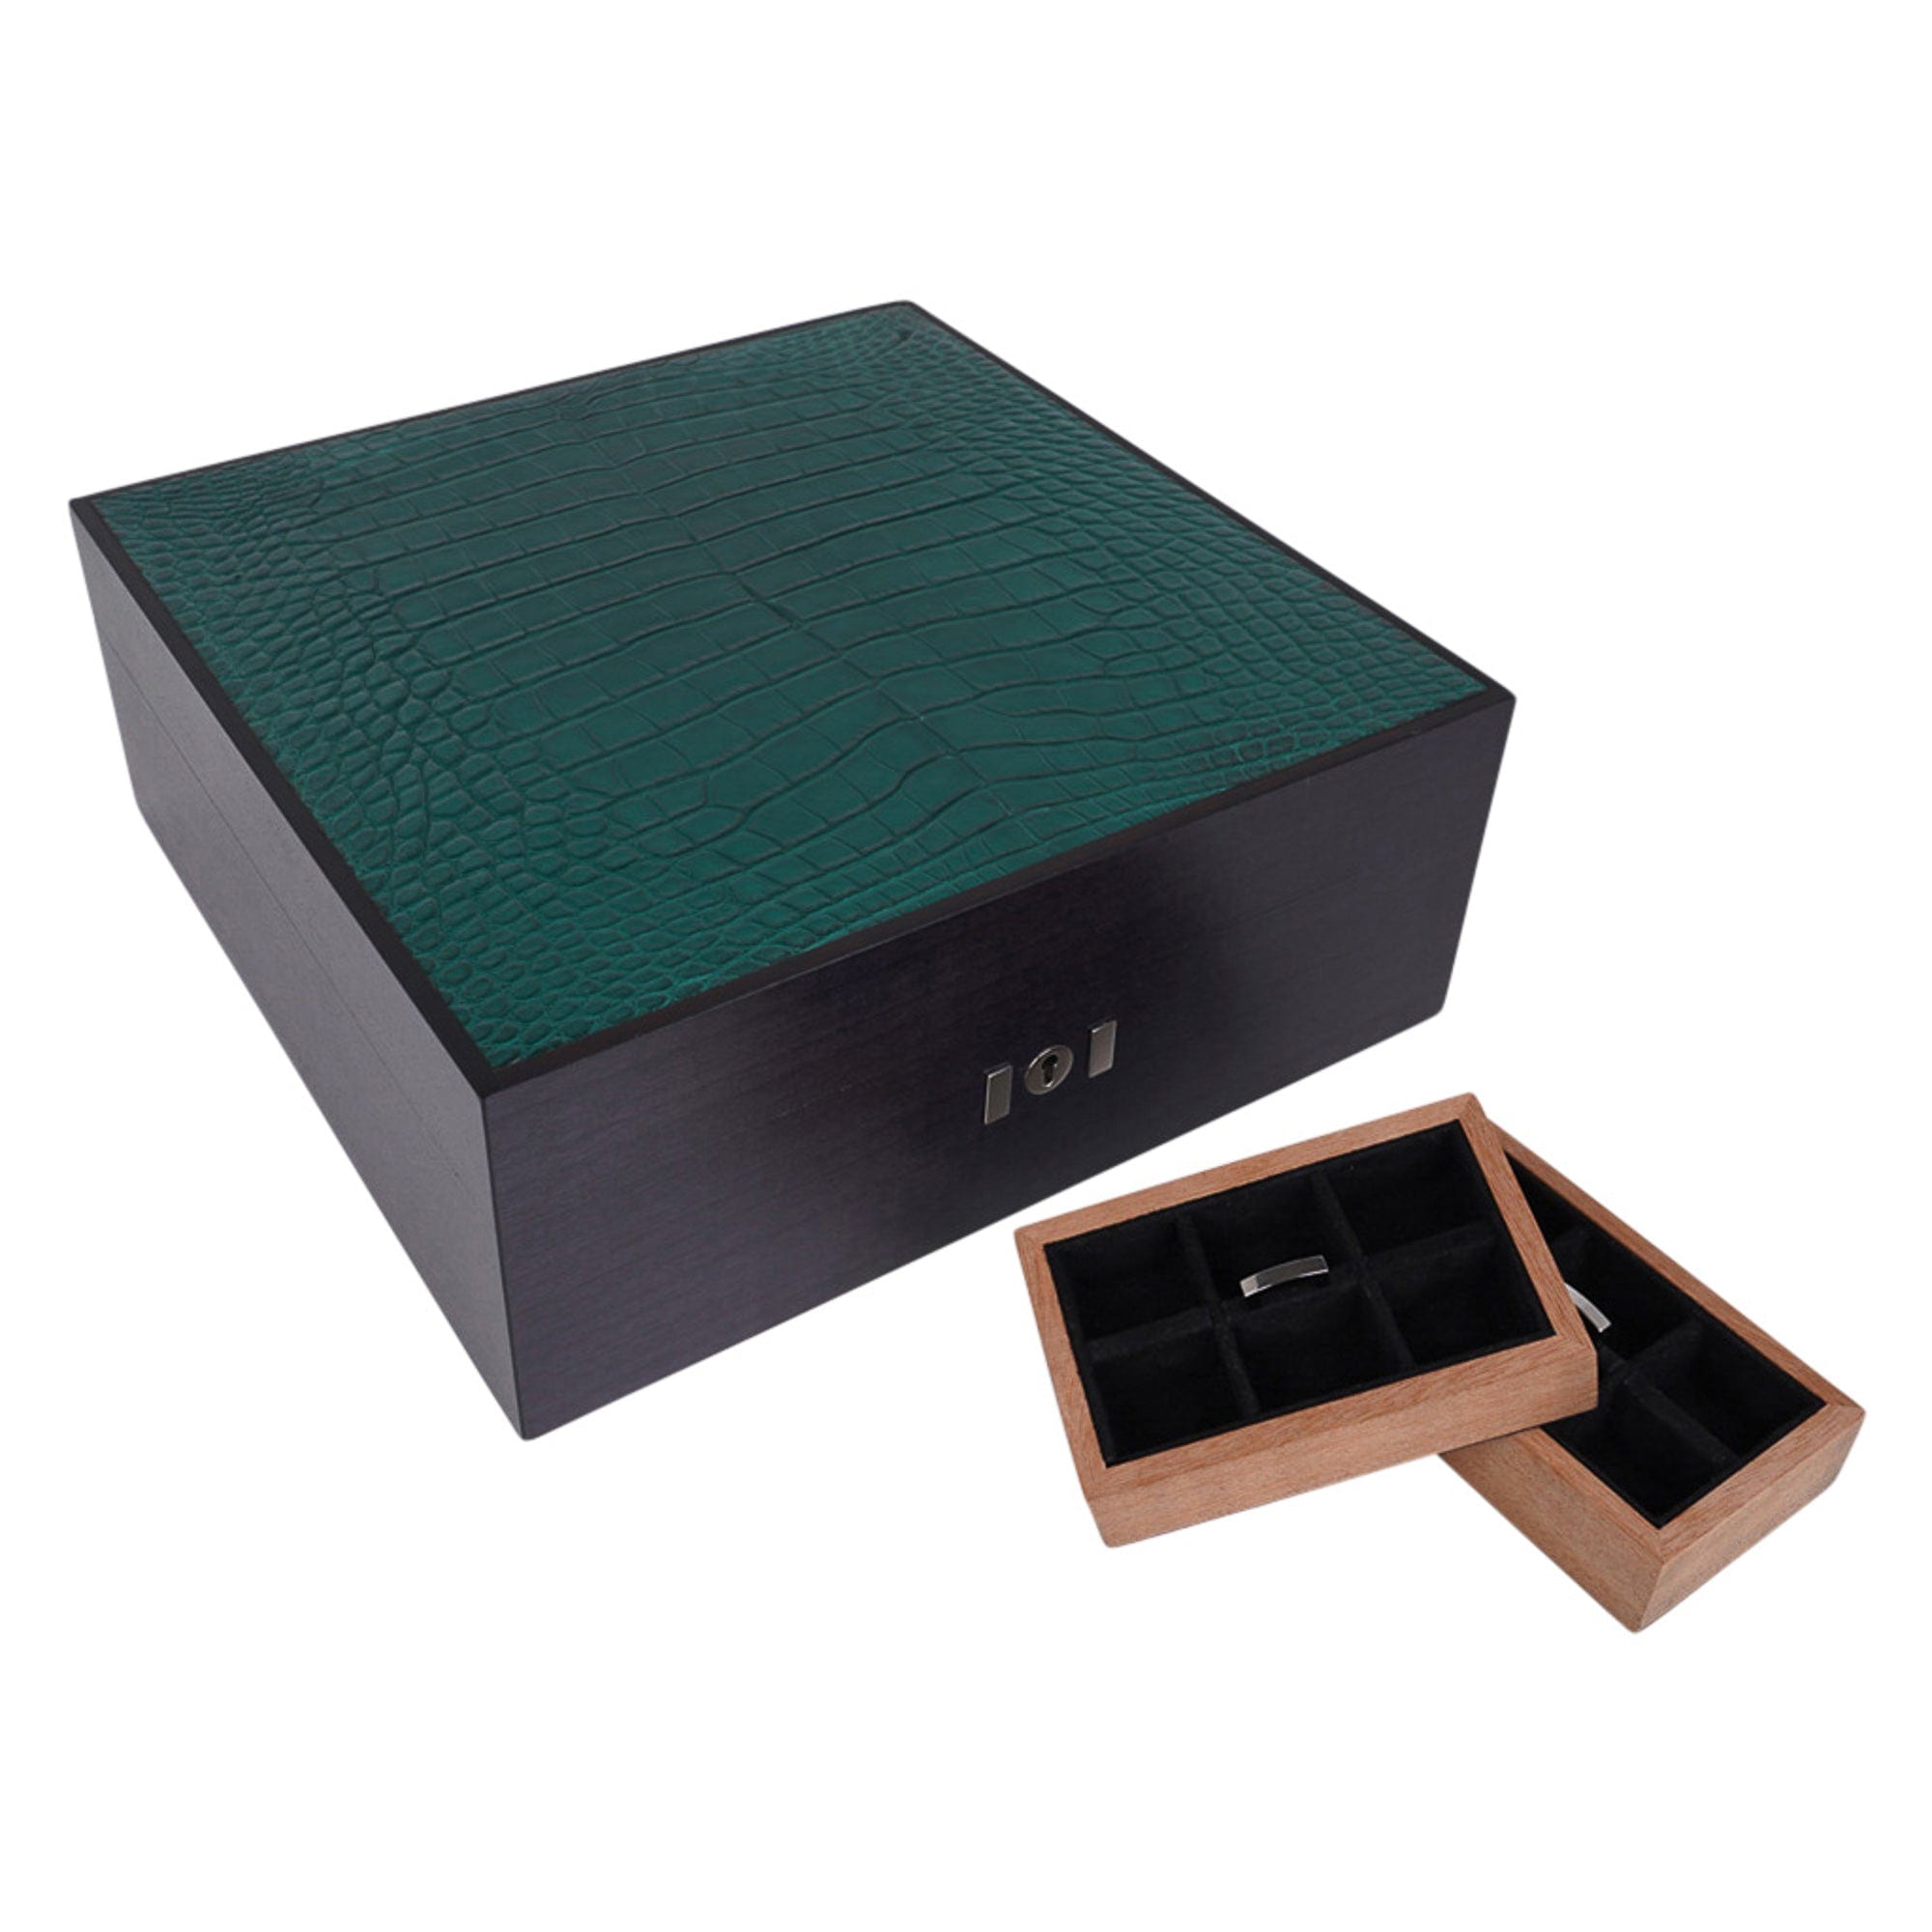 Hermes, Accessories, Empty Authentic Hermes Accessories Box Packaging